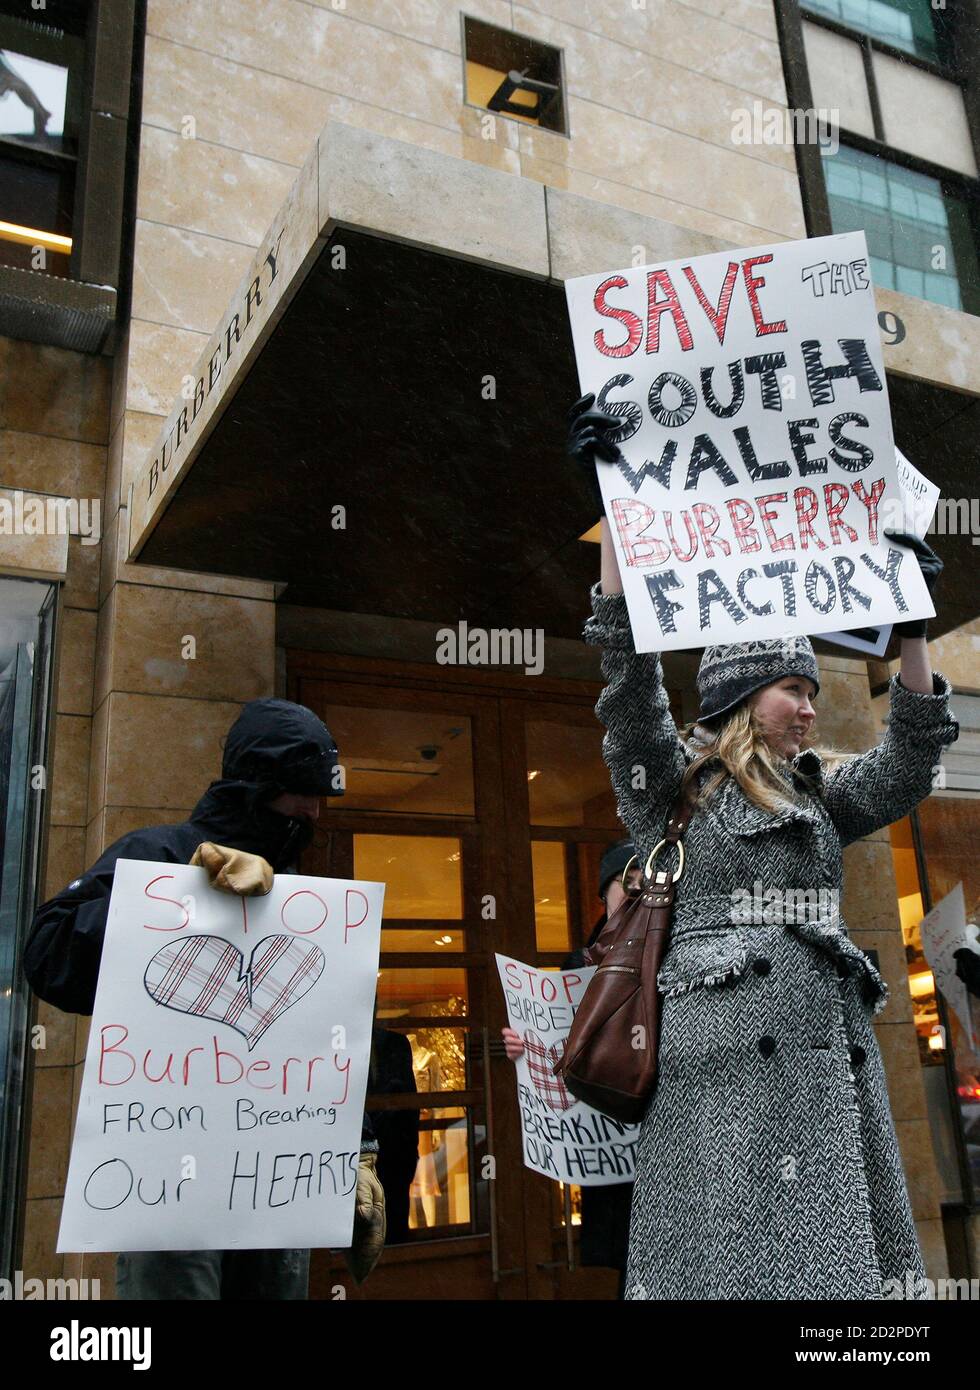 Protesters march the move of Burberry manufacturing, in front of a store in New York February 14, 2007. Shoppers at luxury group Burberry faced picketing its stores in Europe